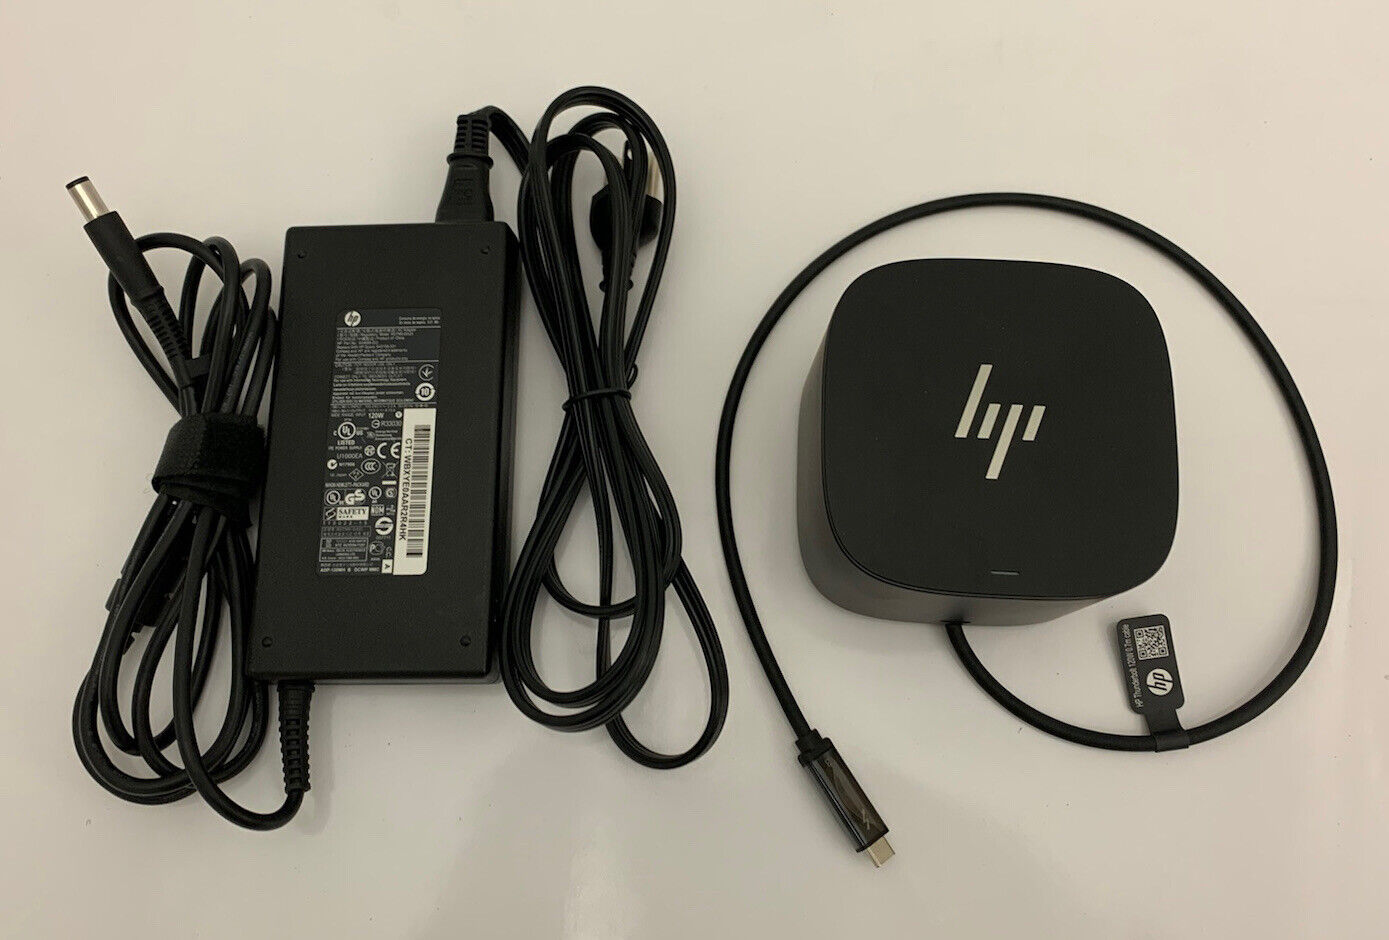 HP Thunderbolt 120W G2 Docking Station HSN-iX01 with 120w AC Adapter  Tested